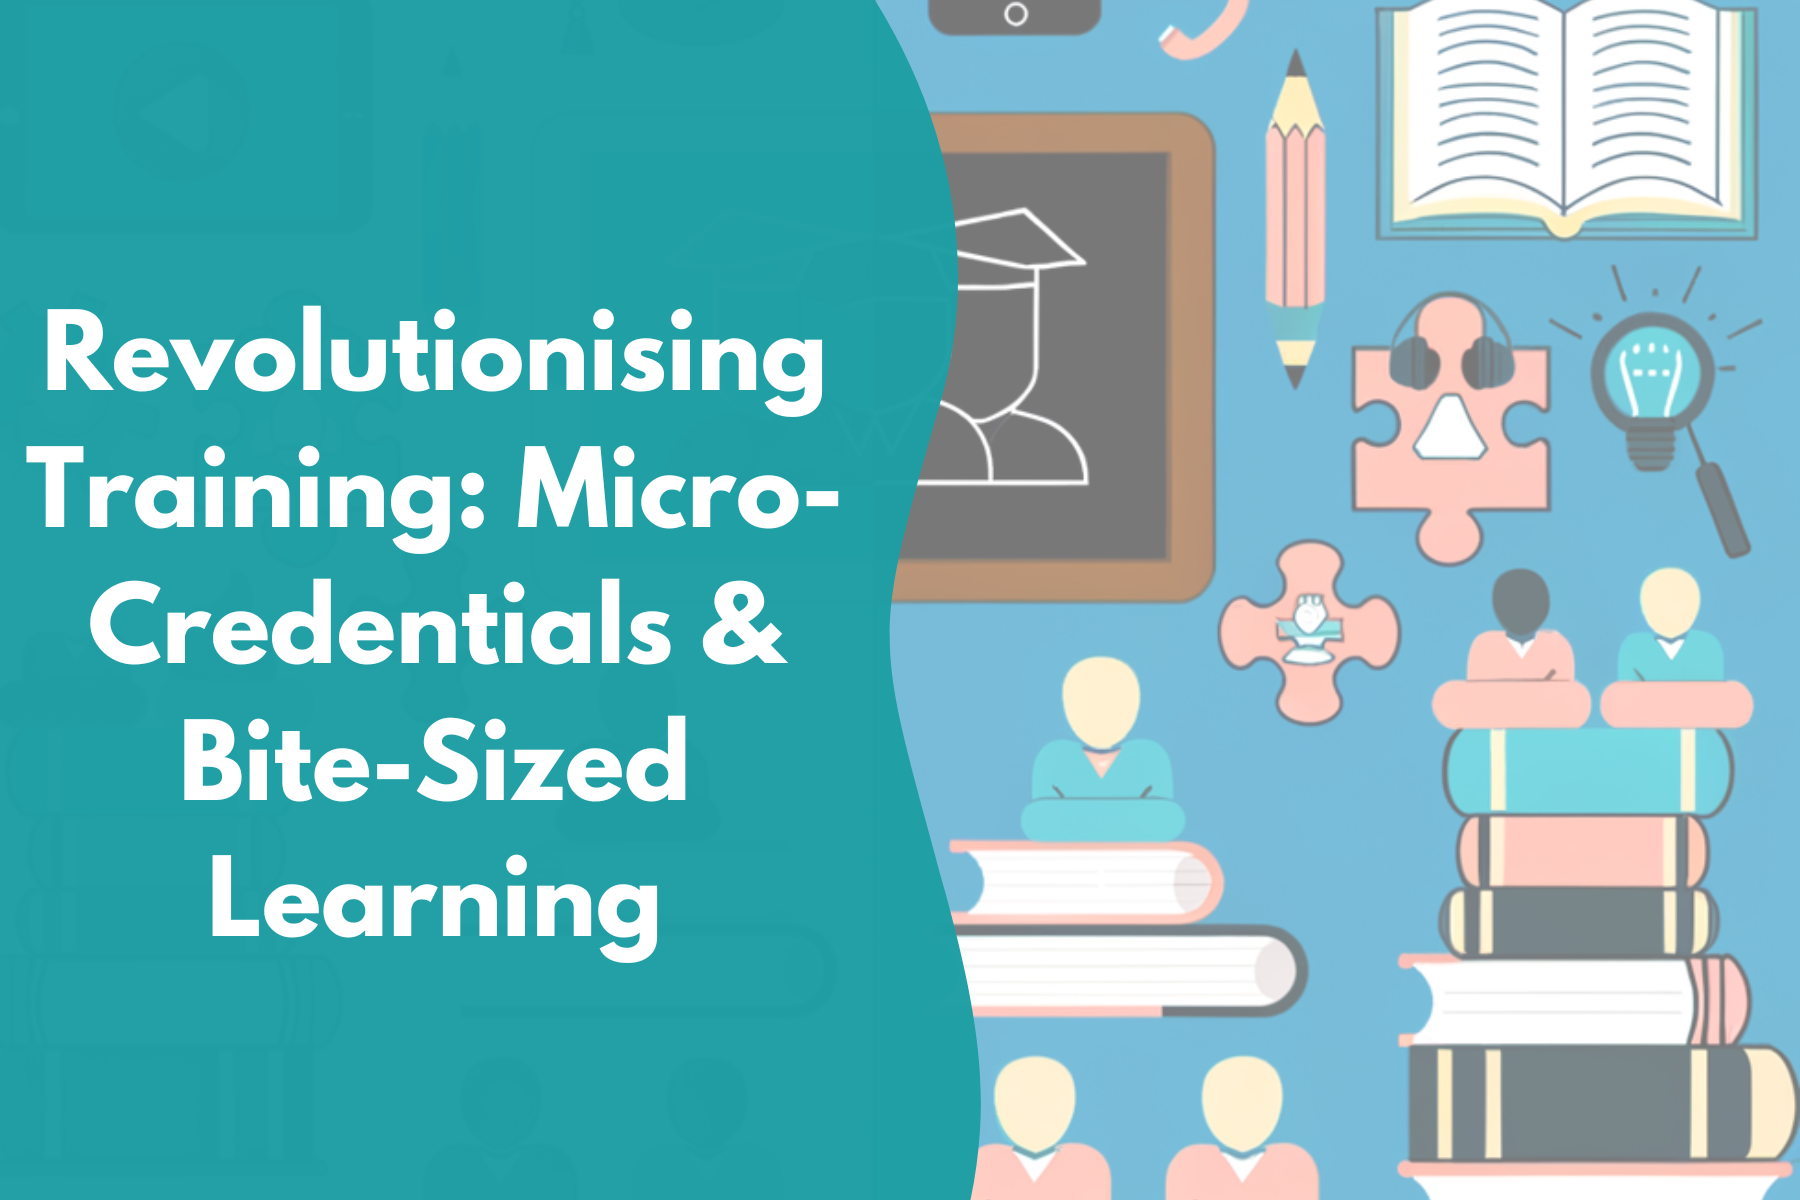 Revolutionising Training: Micro-Credentials & Bite-Sized Learning